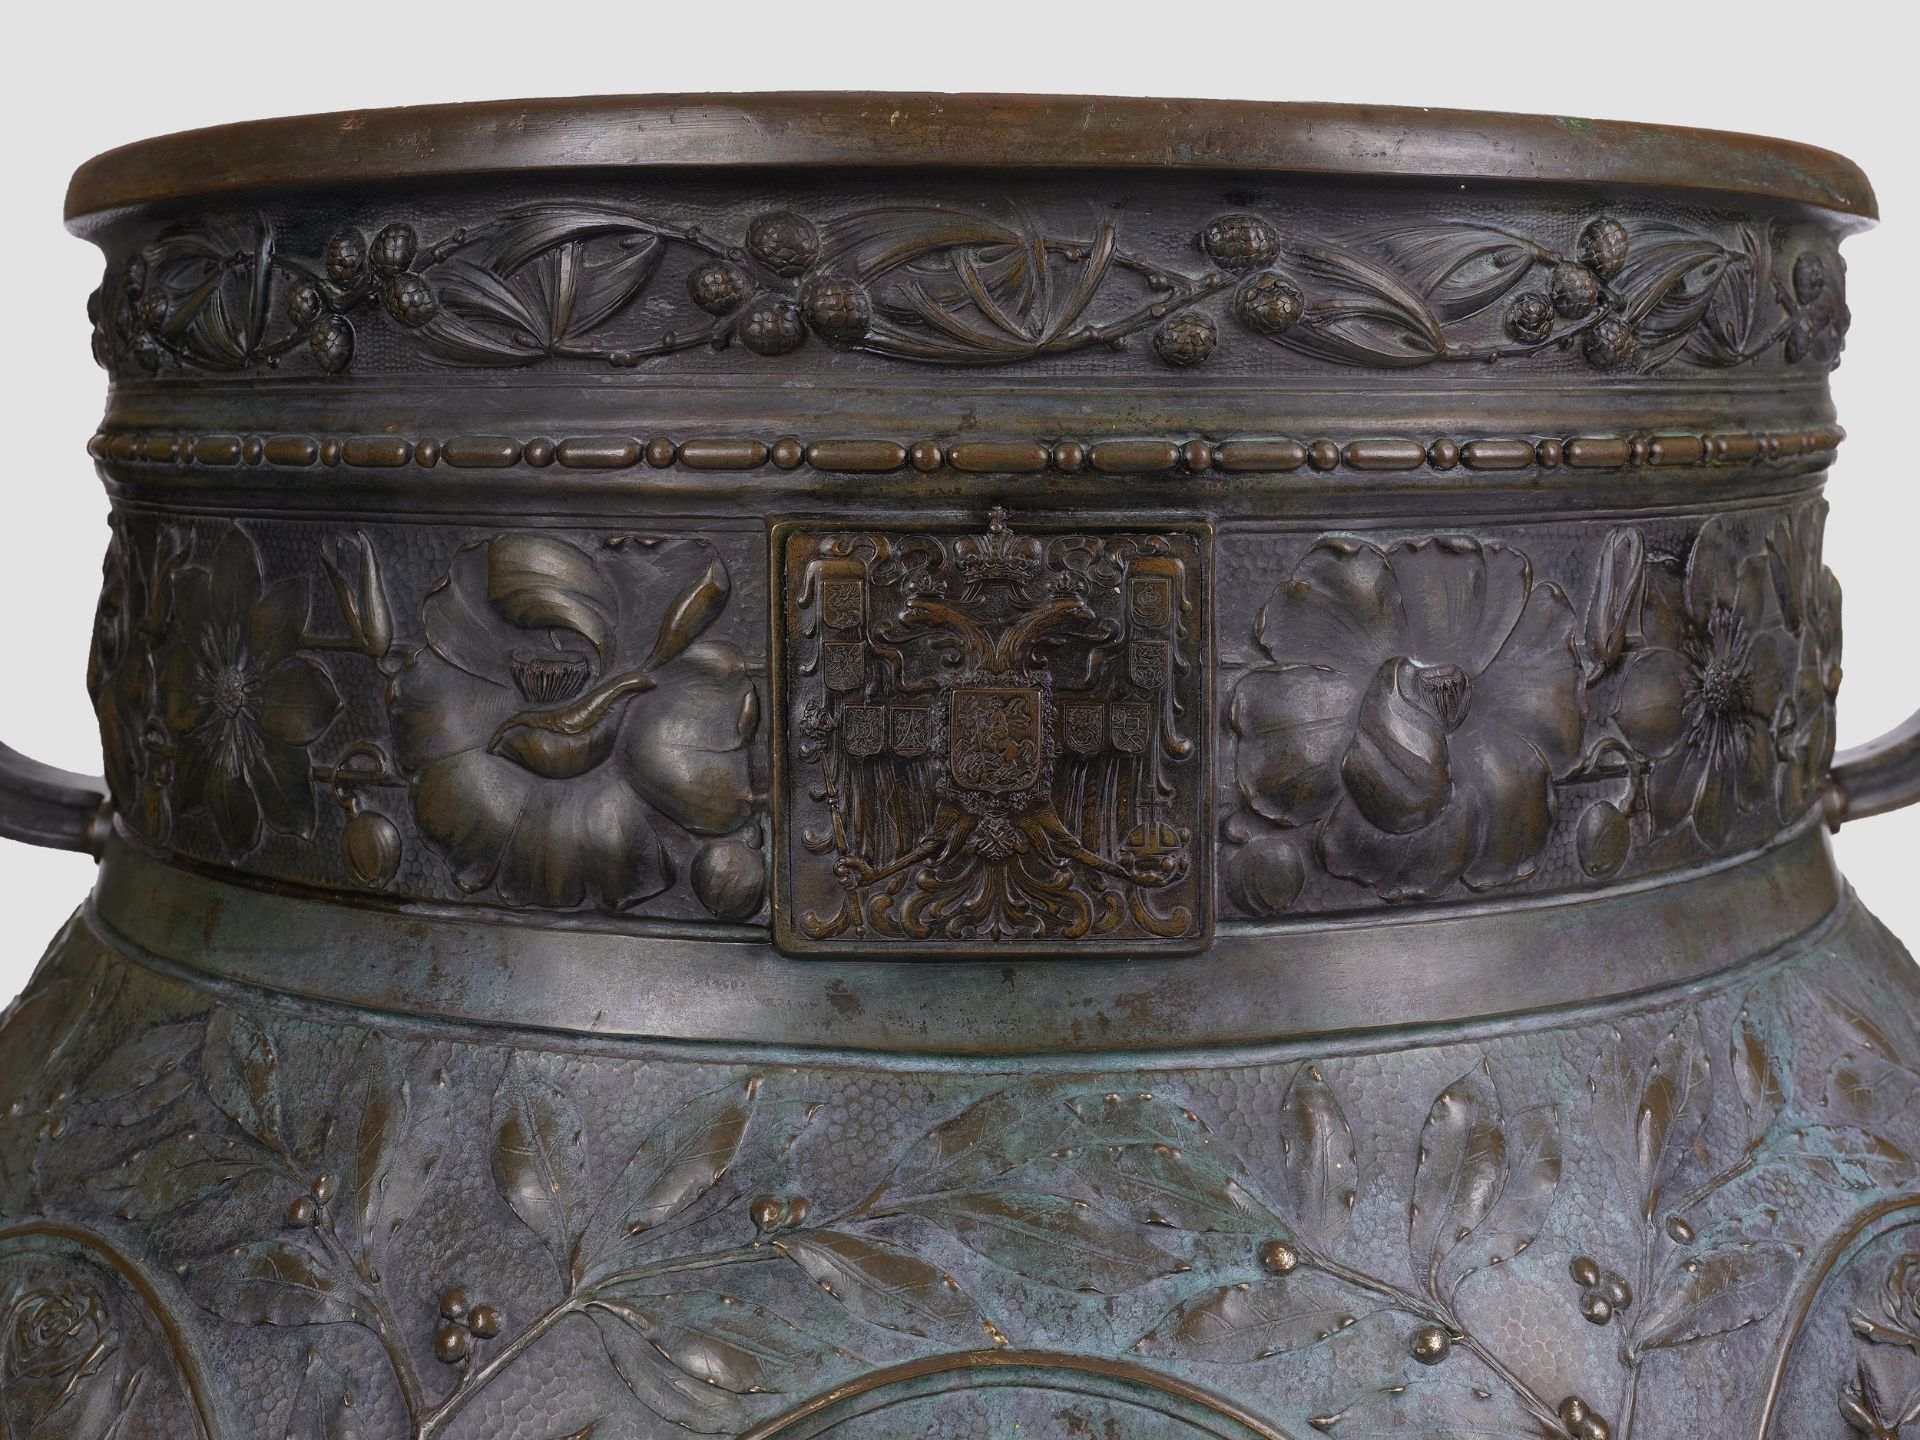 Highly important Russian planter, Modern style, Art Nuovo, Moscow around 1890/1900 - Image 8 of 12